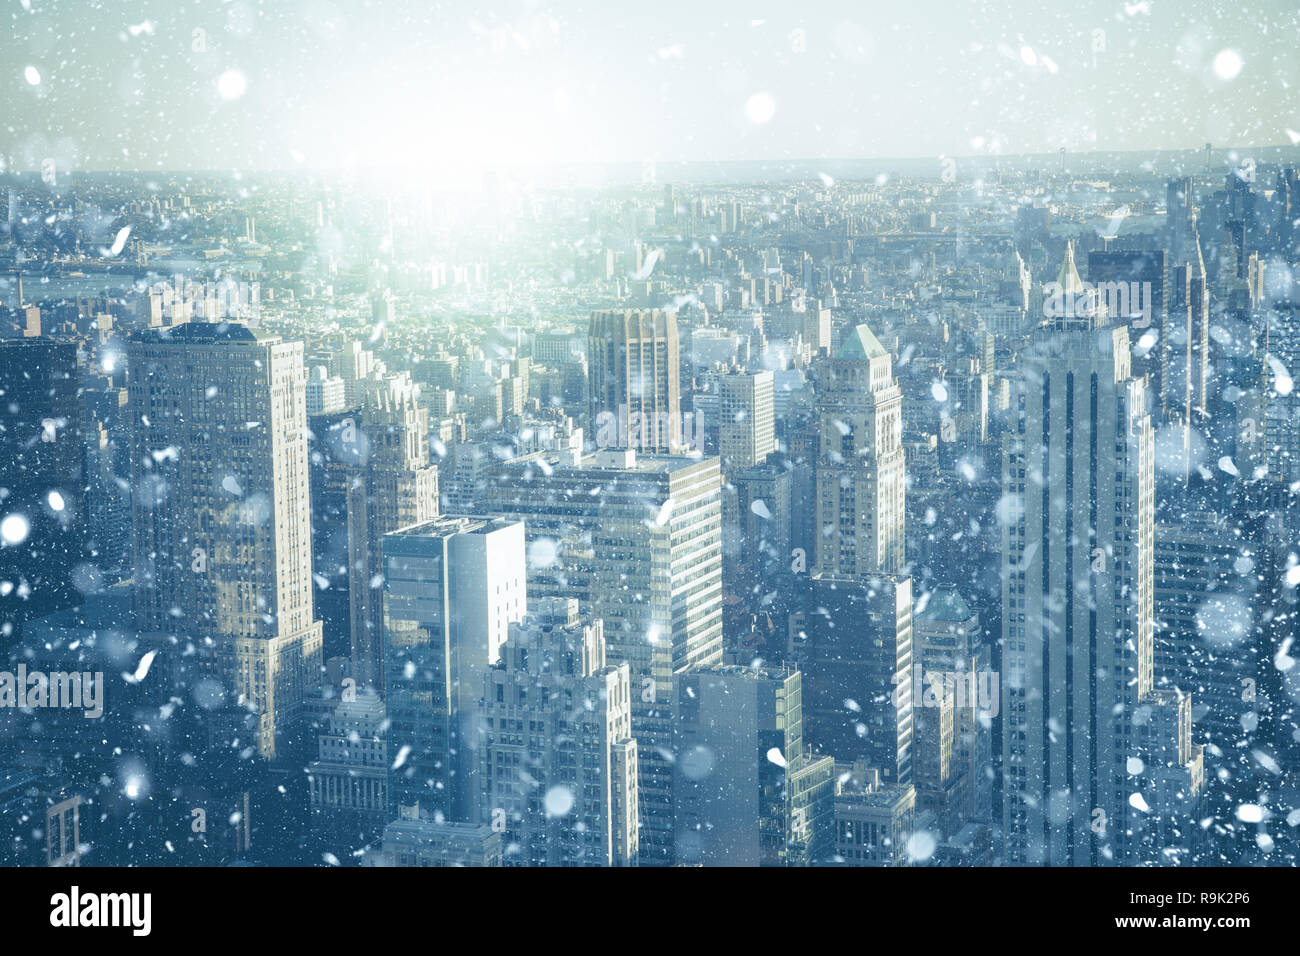 New York City Manhattan skyscraper buildings with snowflakes falling during winter snow storm Stock Photo